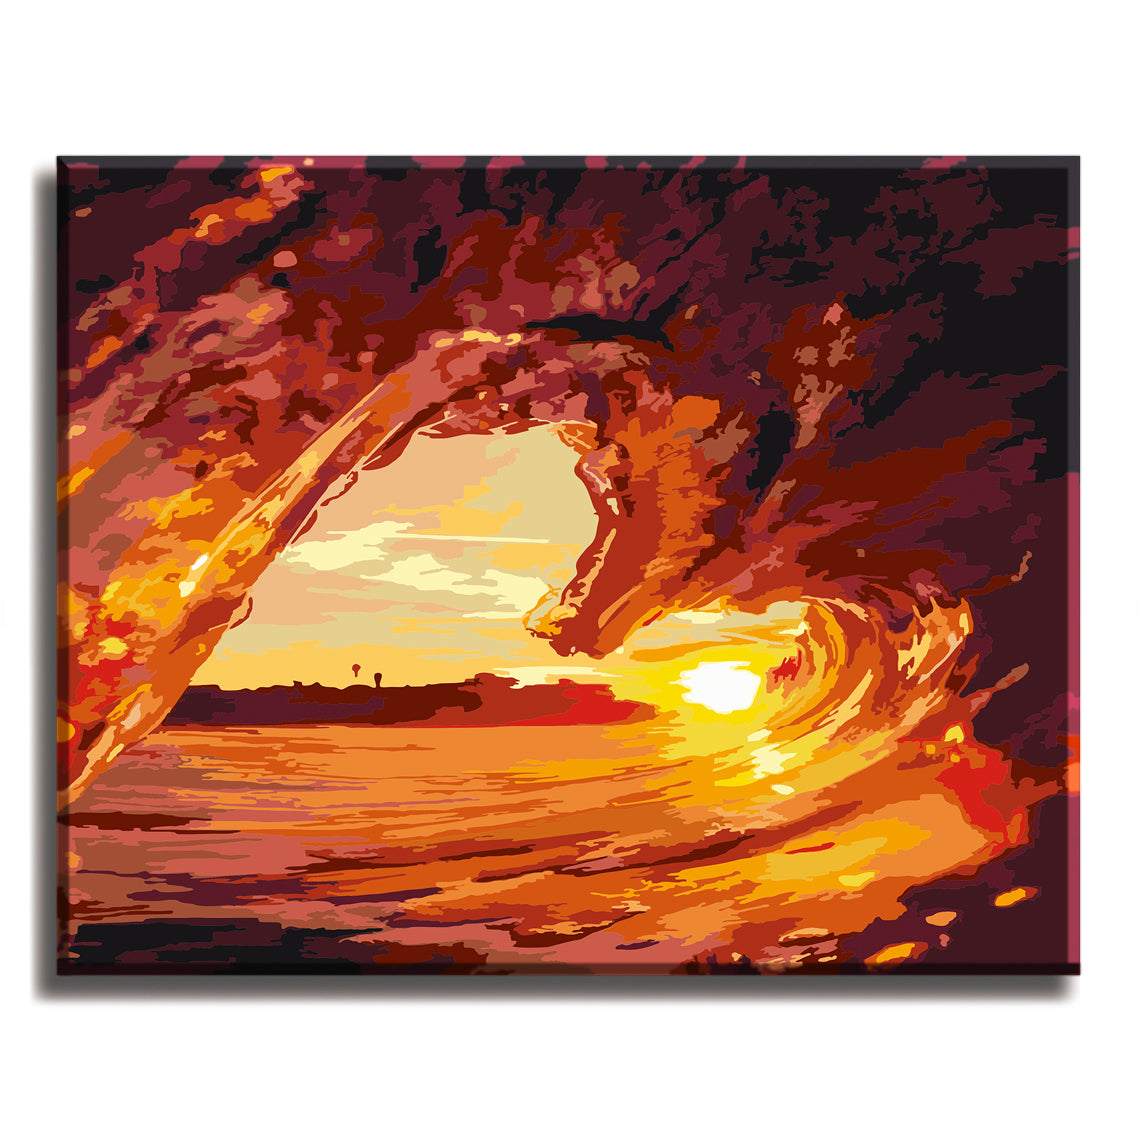 Under the Cave - Paint by Numbers Kit for Adults DIY Oil Painting Kit on Canvas